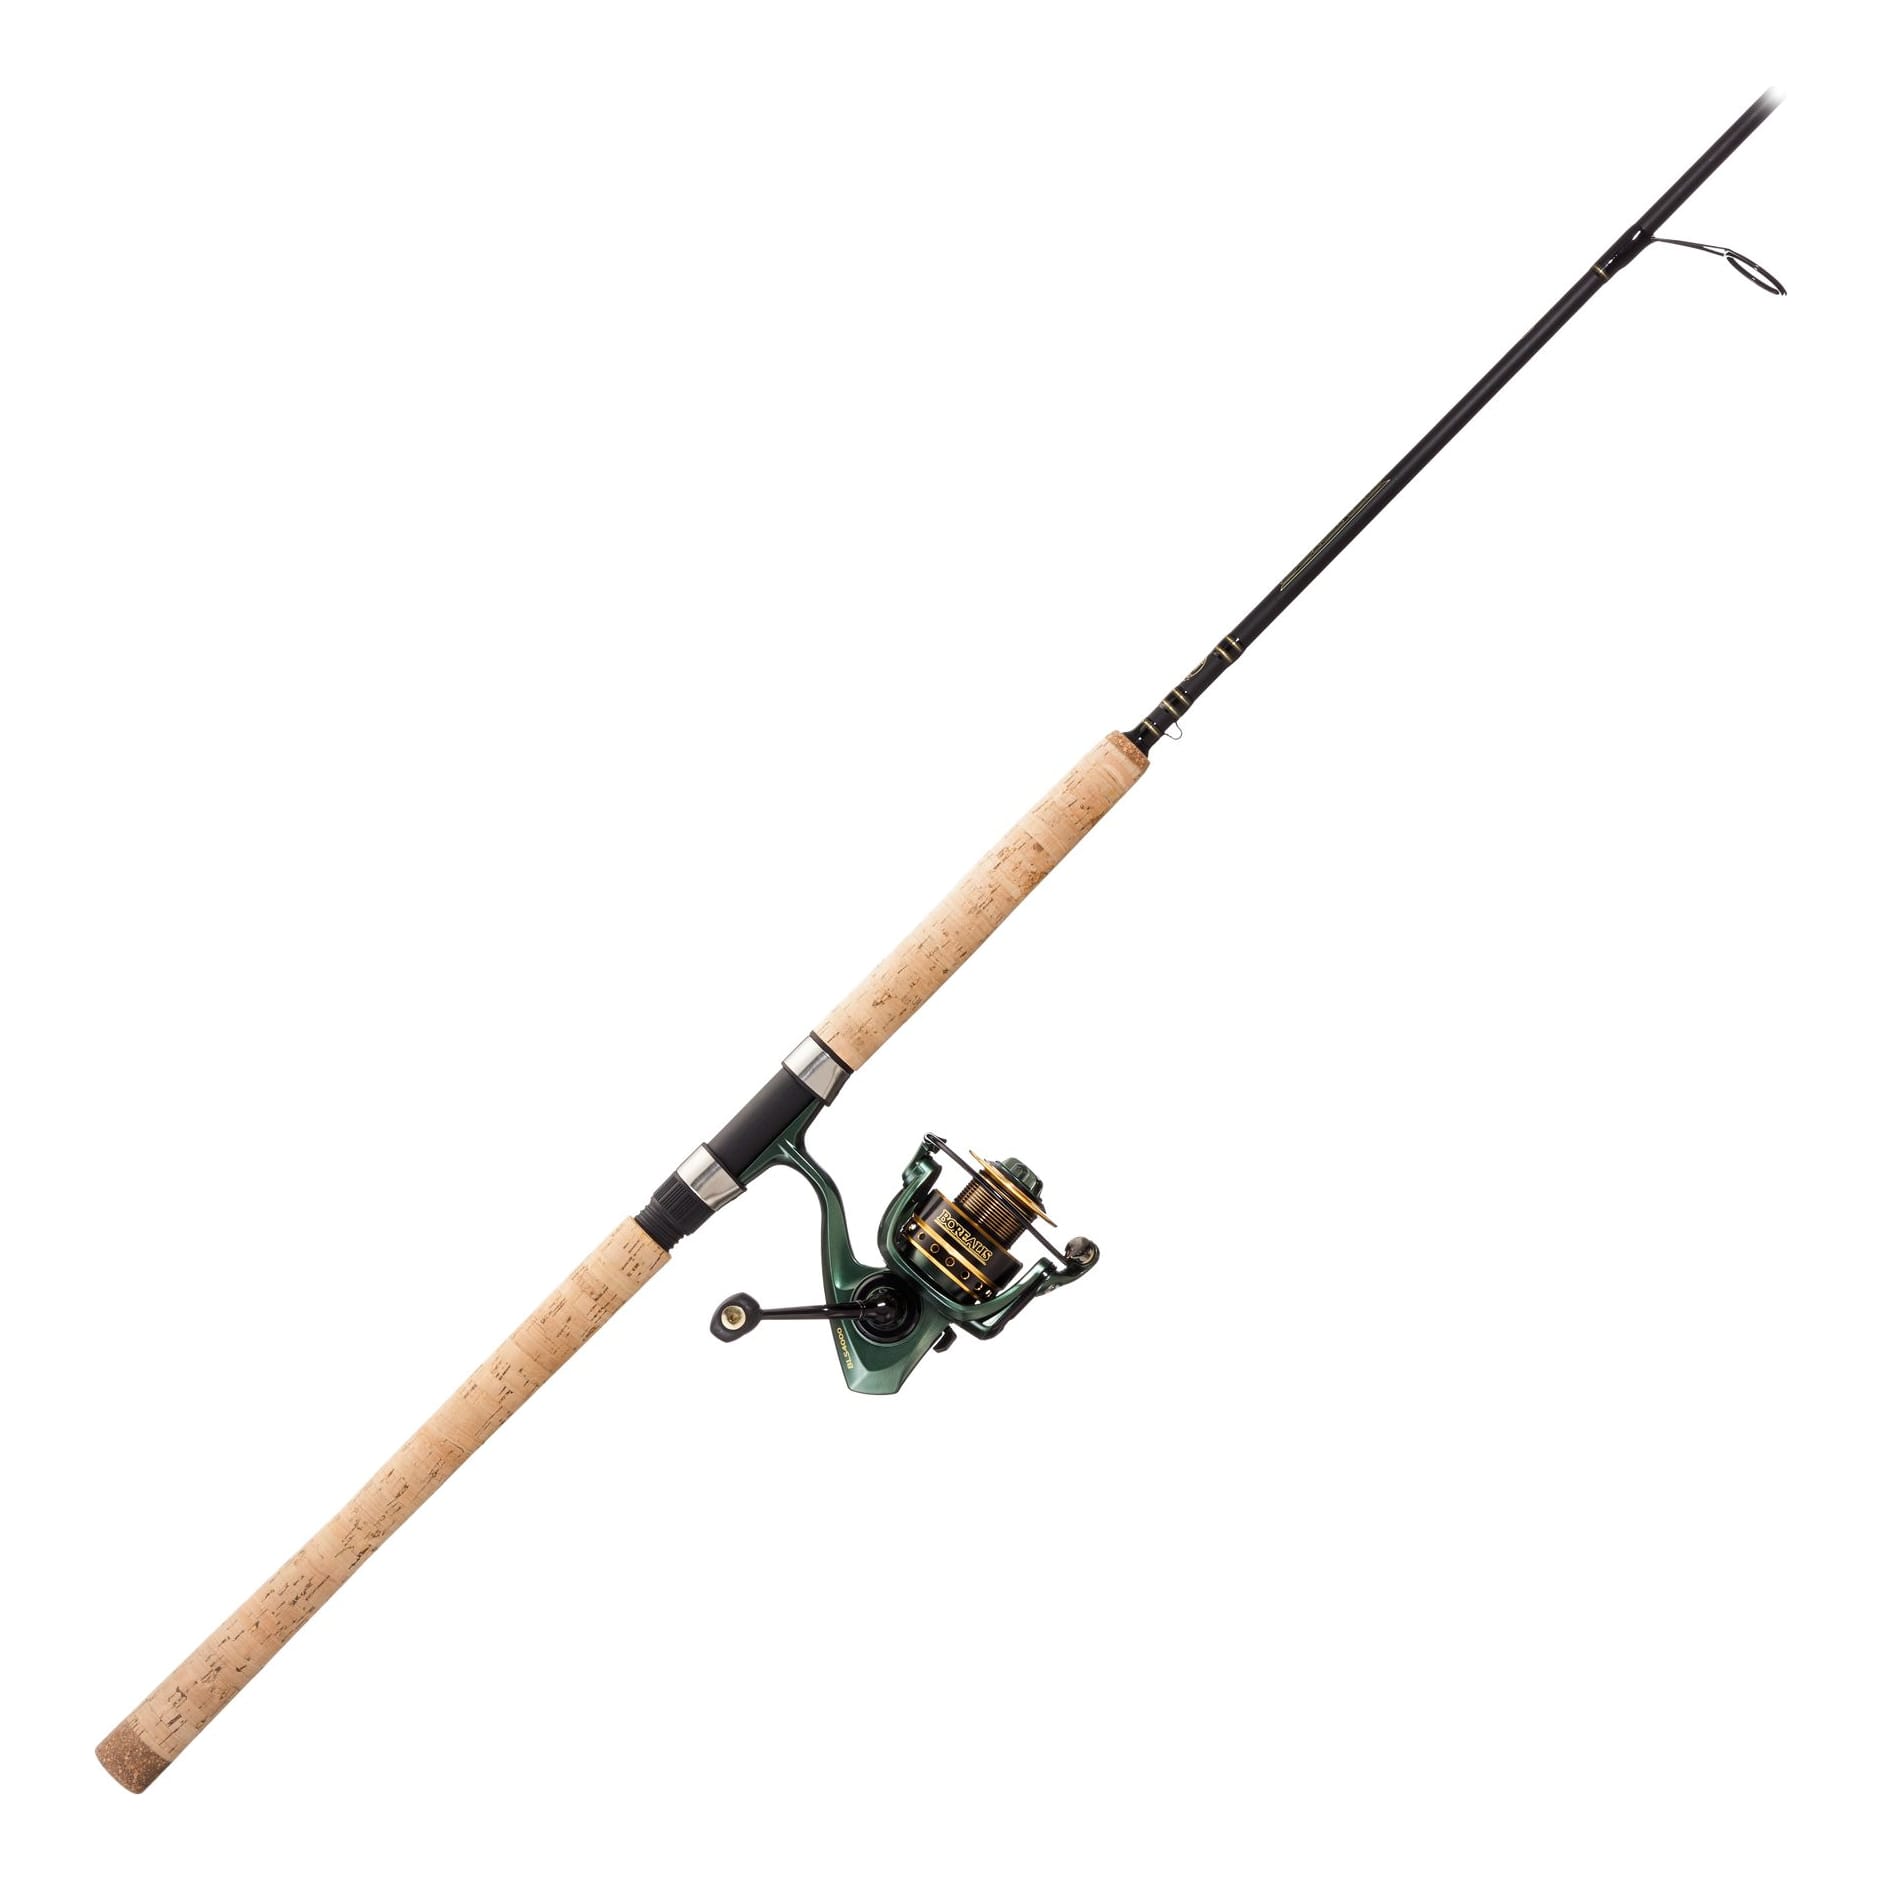 Bass Pro Shops Borealis Rod And Reel Spinning Combo - Cabelas - BASS